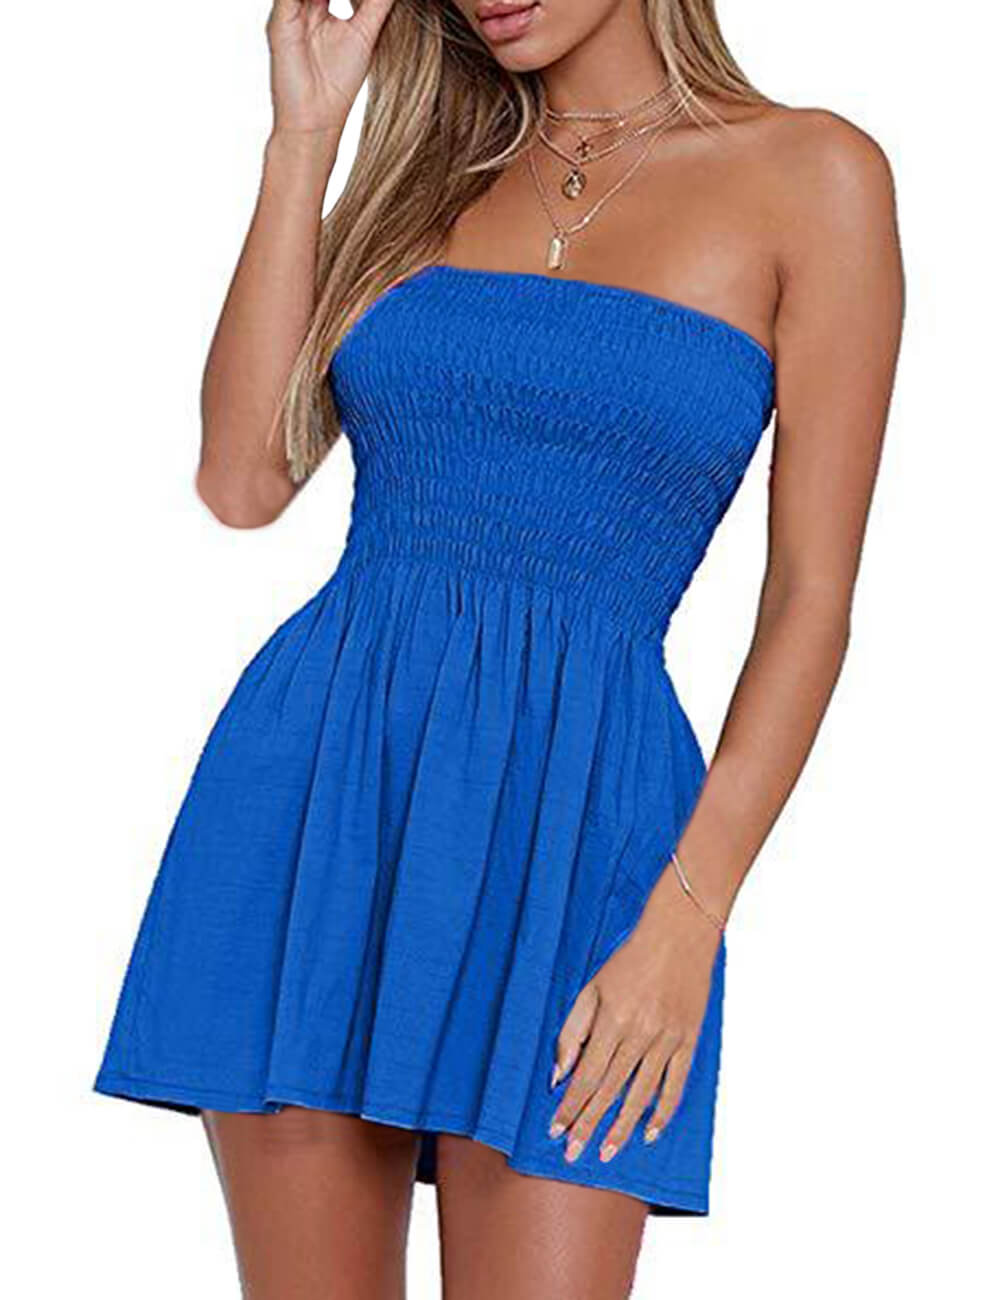  Women's Smocking Tube Top Dress Summer Sexy Strapless Sleeveless Pleated Fit and Flare Cover Up Beach Mini Dress